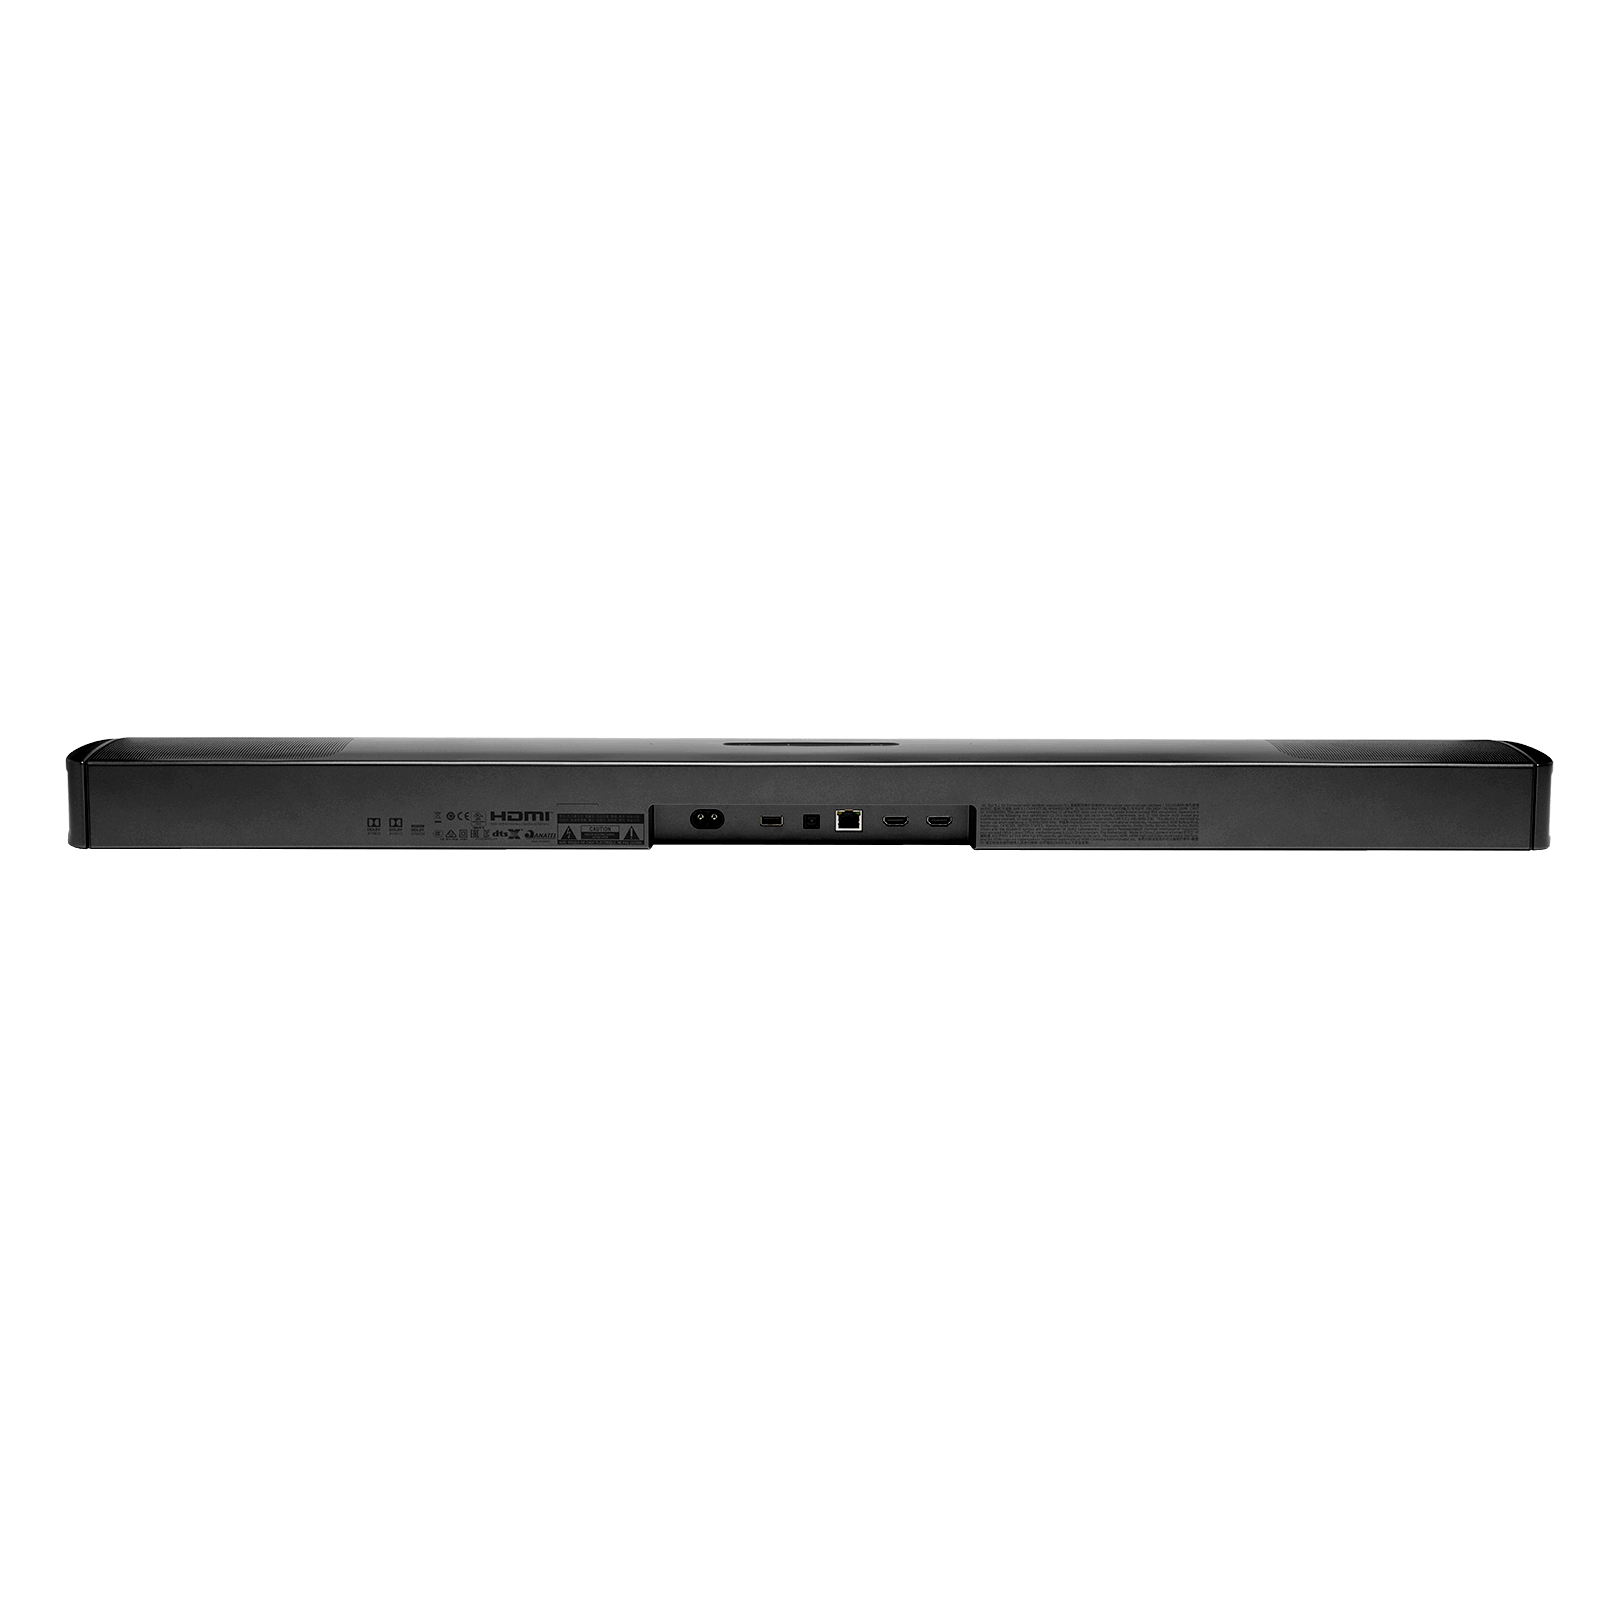 JBL BAR 9.1 TRUE WIRELESS SURROUND 9.1 Channel Soundbar System with surround speakers and Dolby Atmos®